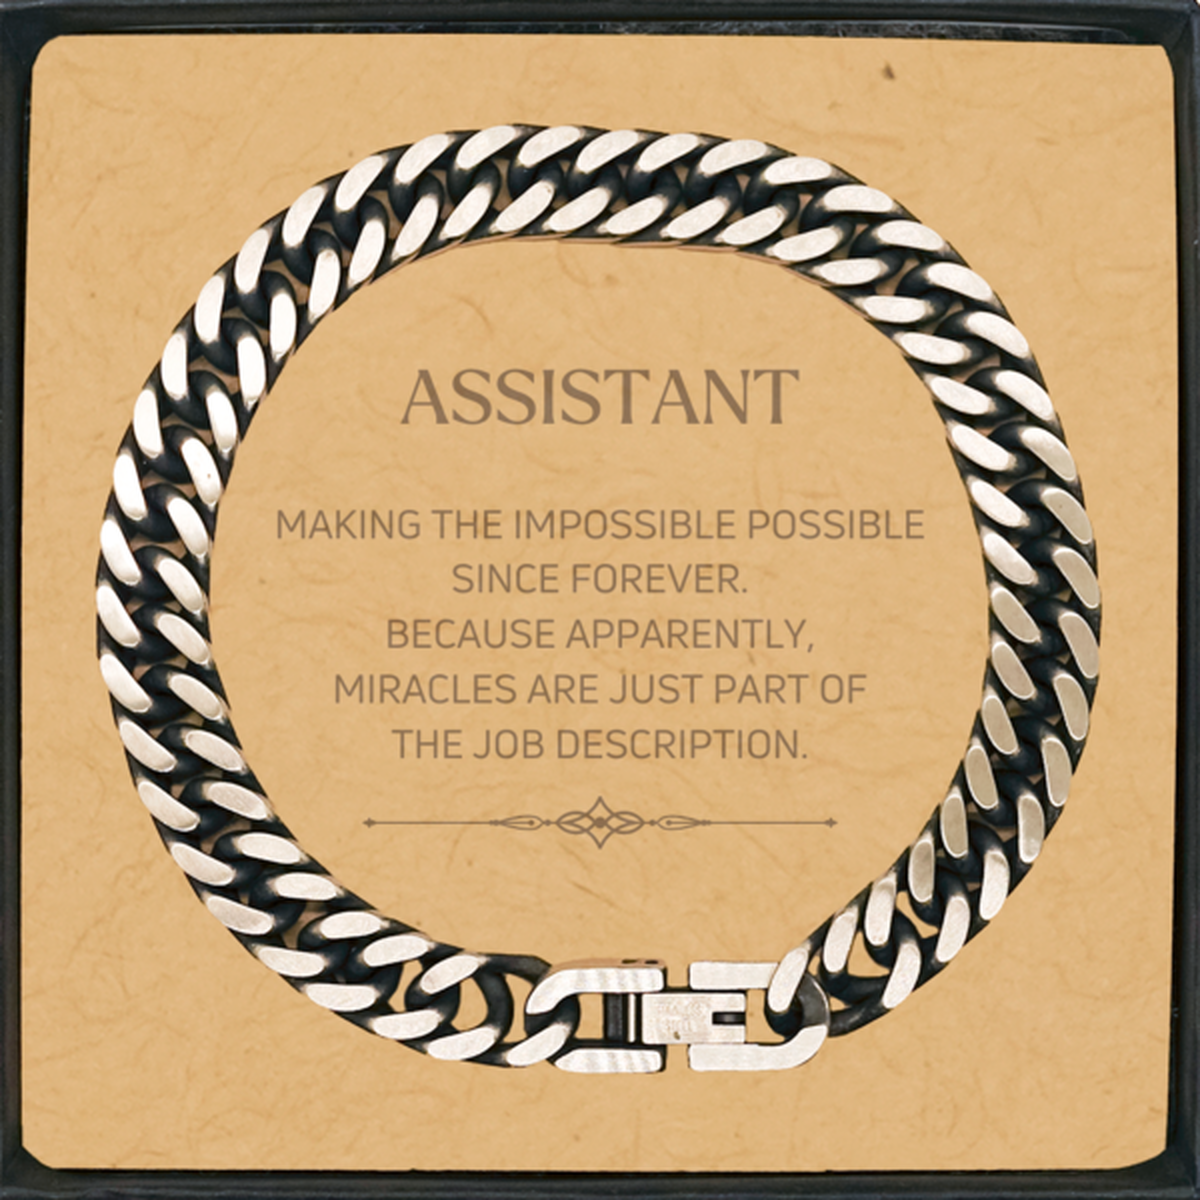 Funny Assistant Gifts, Miracles are just part of the job description, Inspirational Birthday Cuban Link Chain Bracelet For Assistant, Men, Women, Coworkers, Friends, Boss